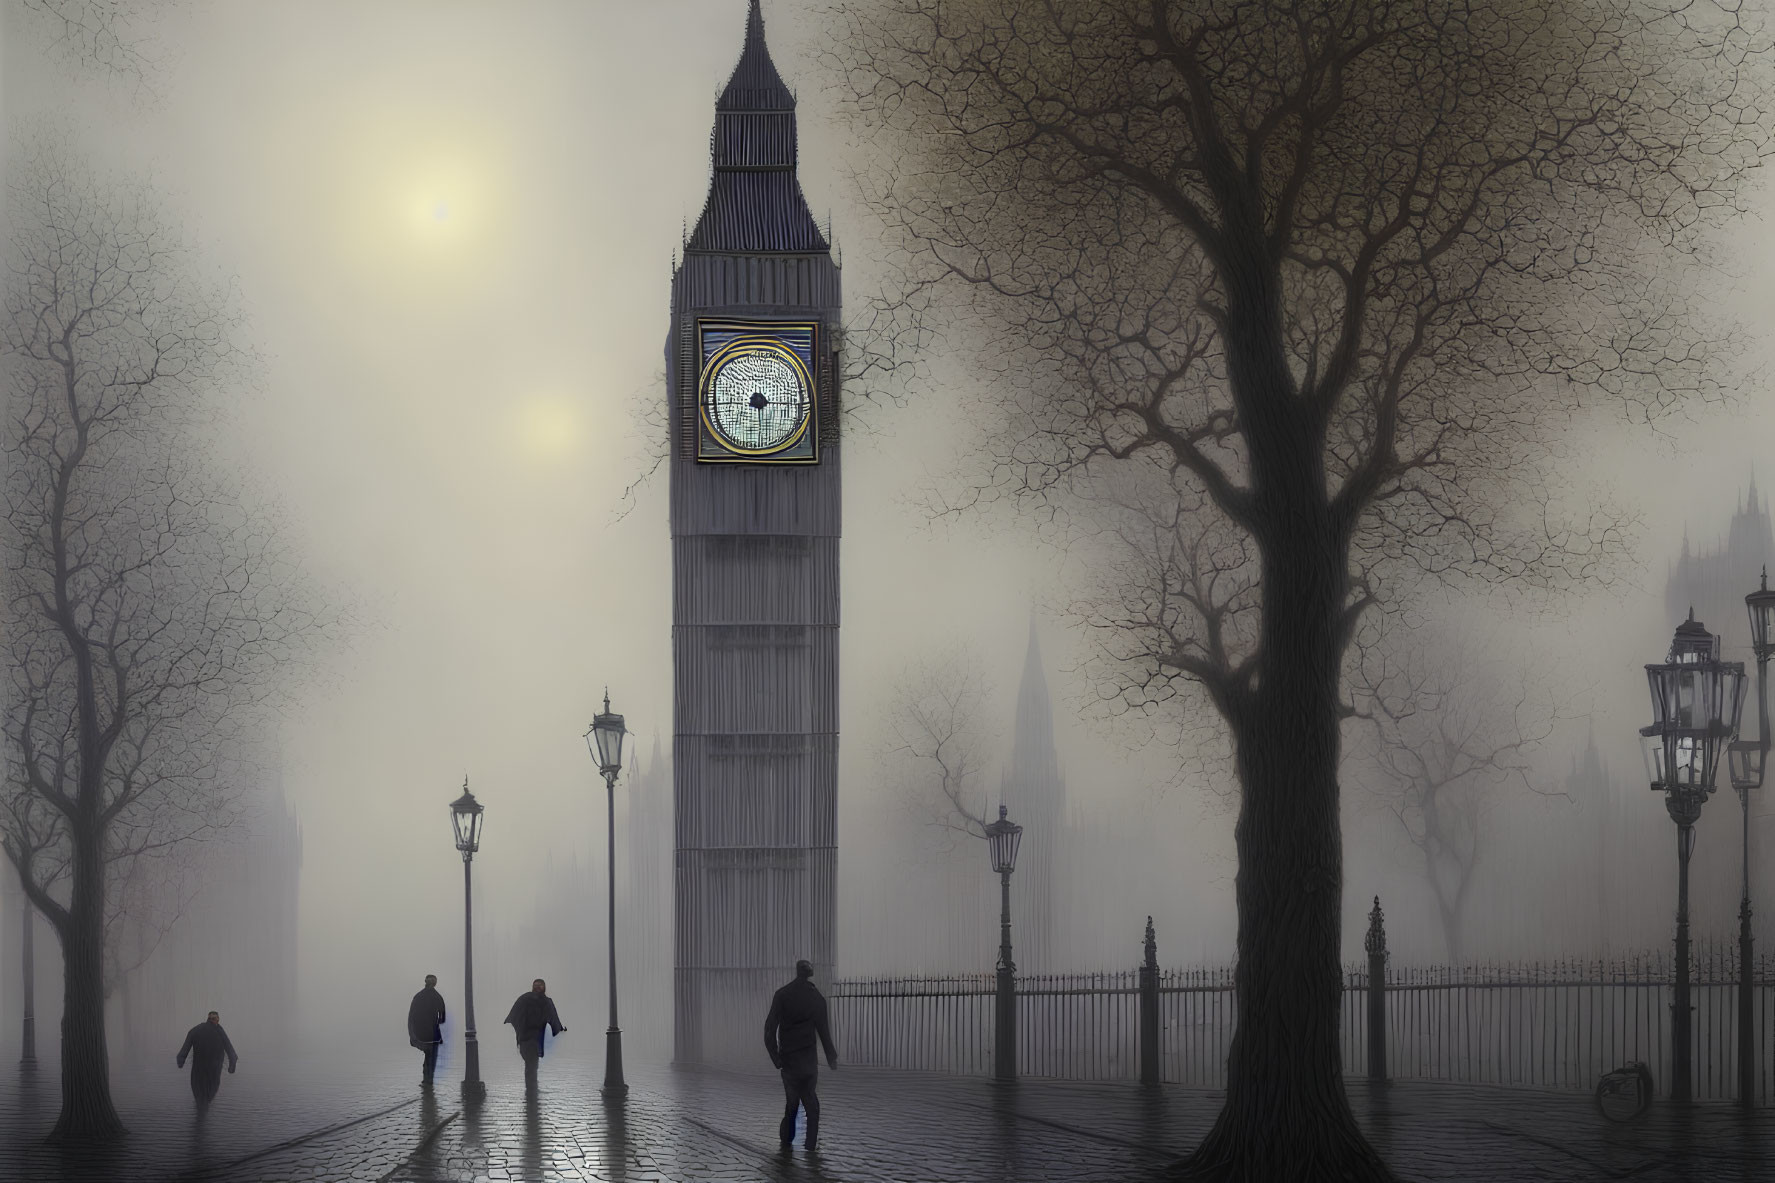 Foggy urban scene with silhouetted figures near Big Ben clock tower